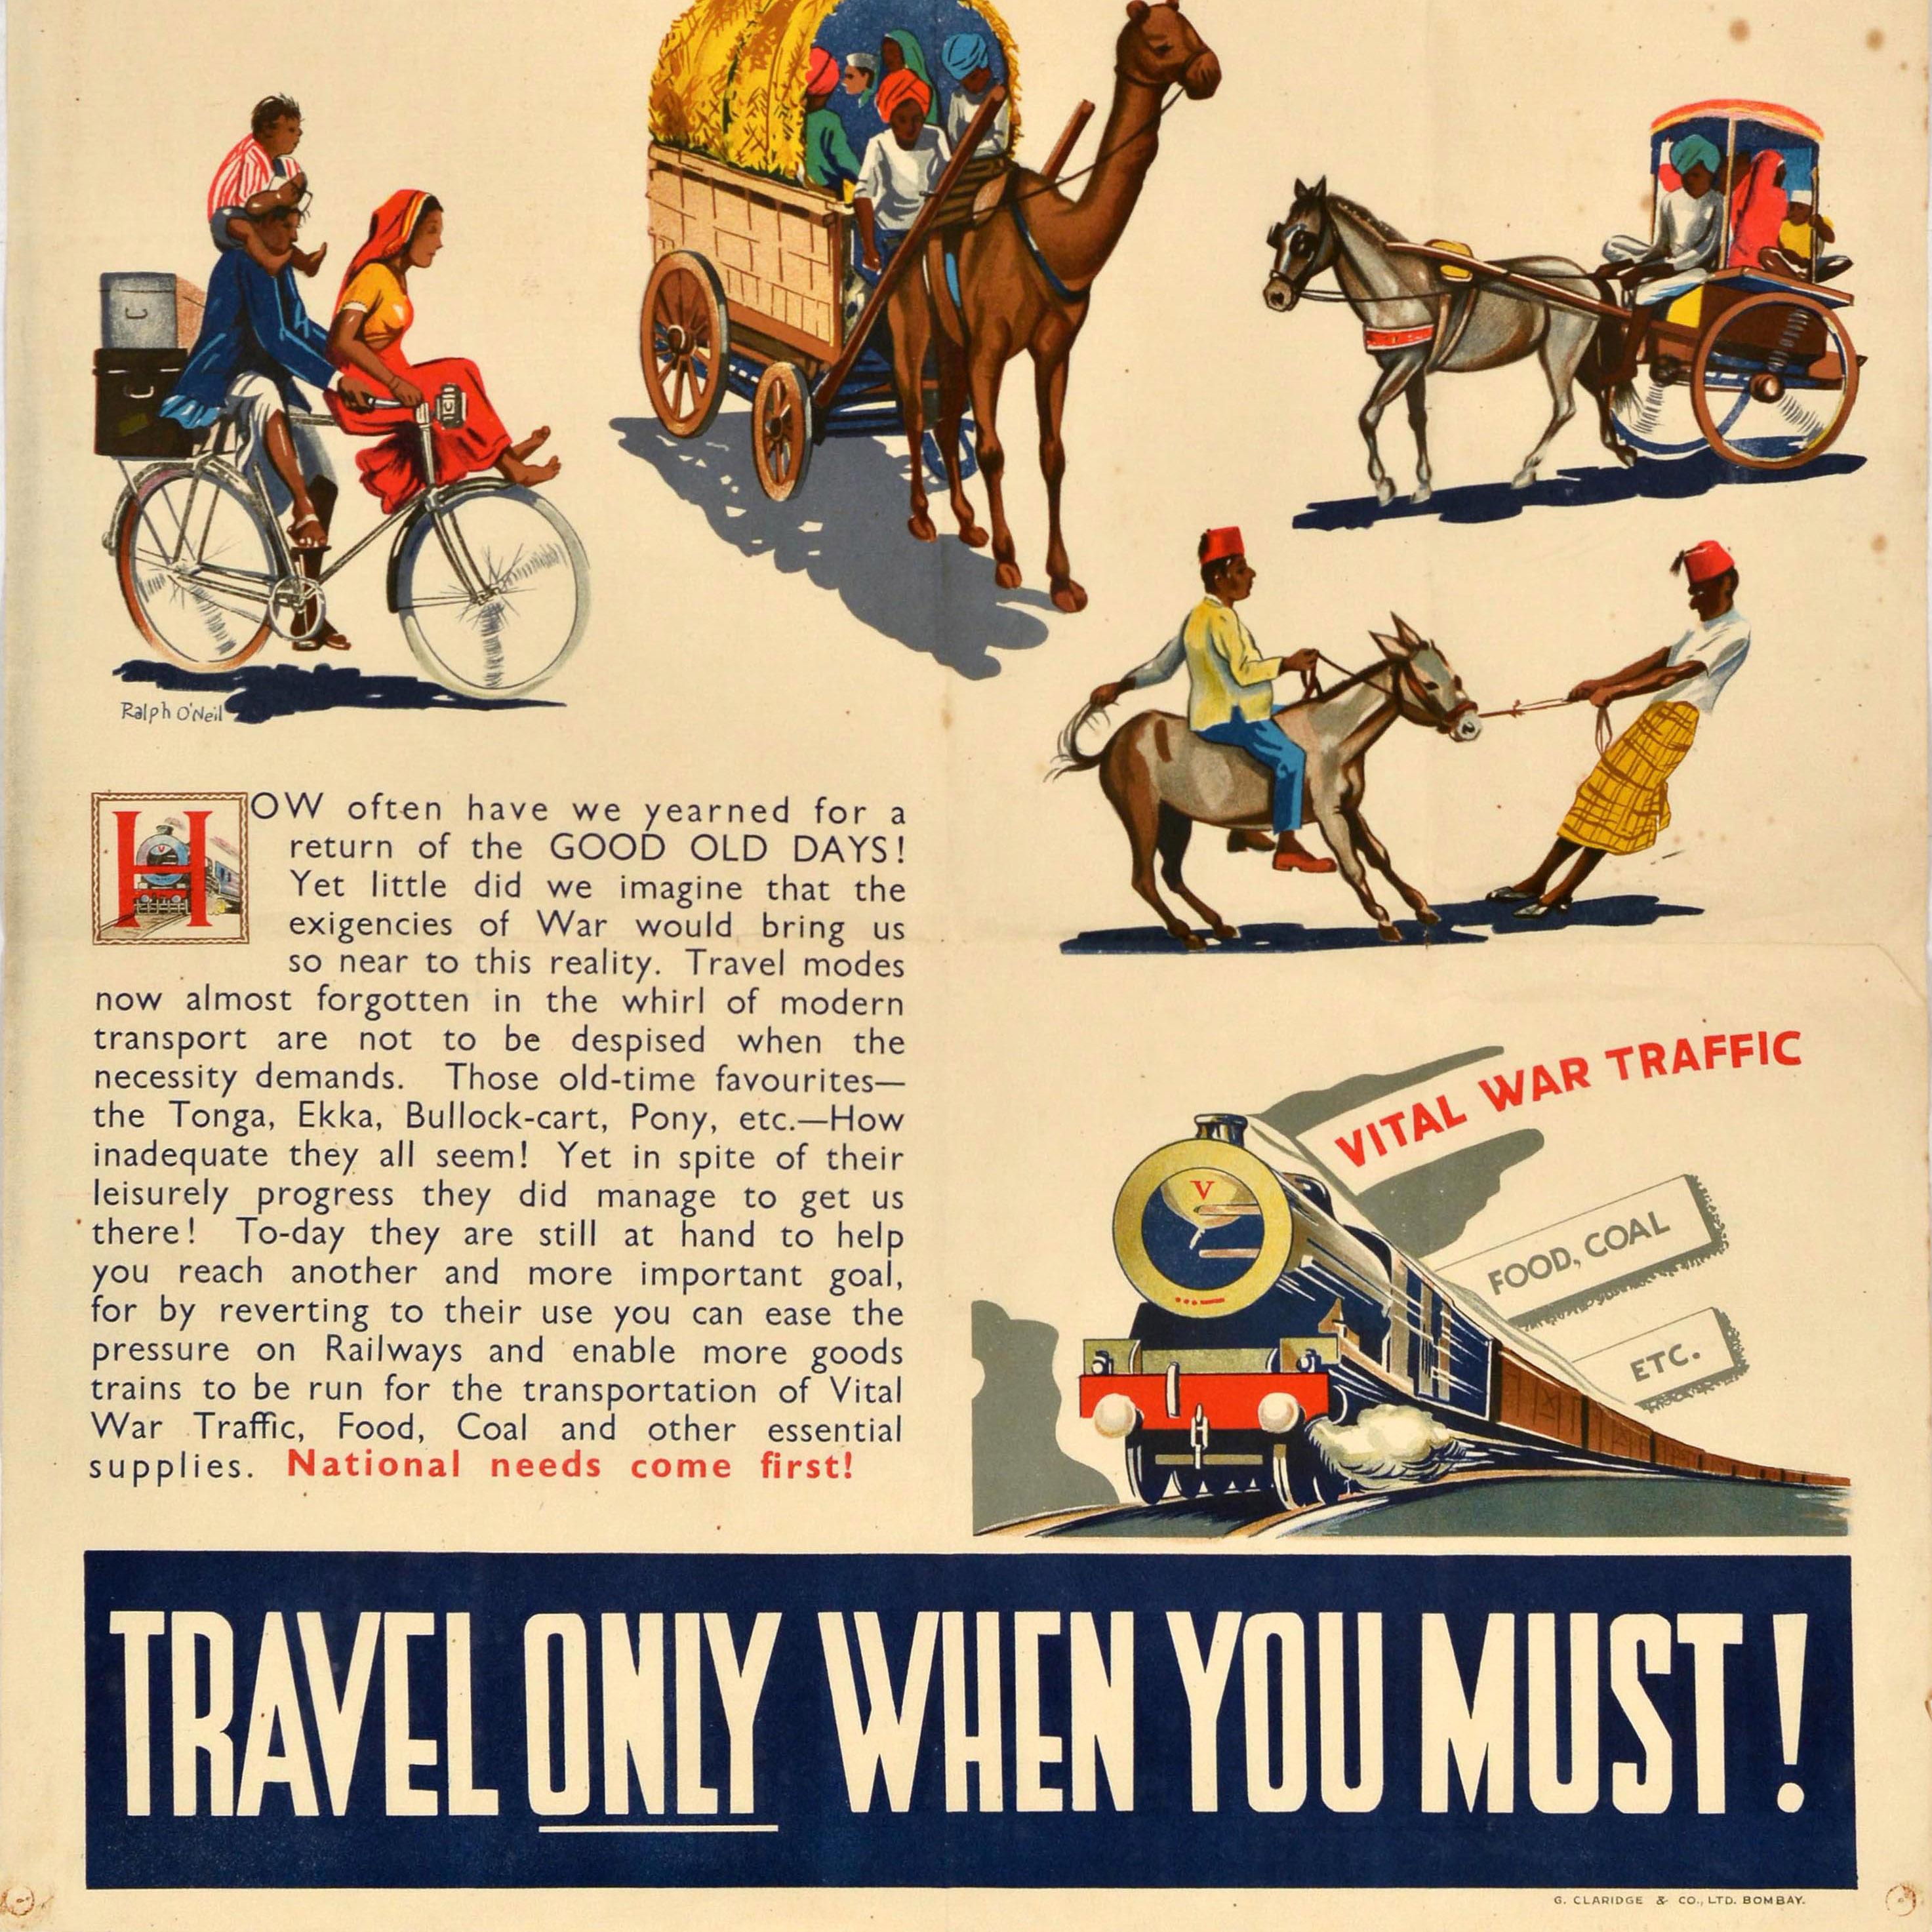 Original vintage World War Two travel poster - Back to the Good Old Days! ...National needs come first! Travel only when you must! - issued by the Great Indian Peninsula Railway (GIP 1849-1951) featuring colourful illustrations of a person riding a